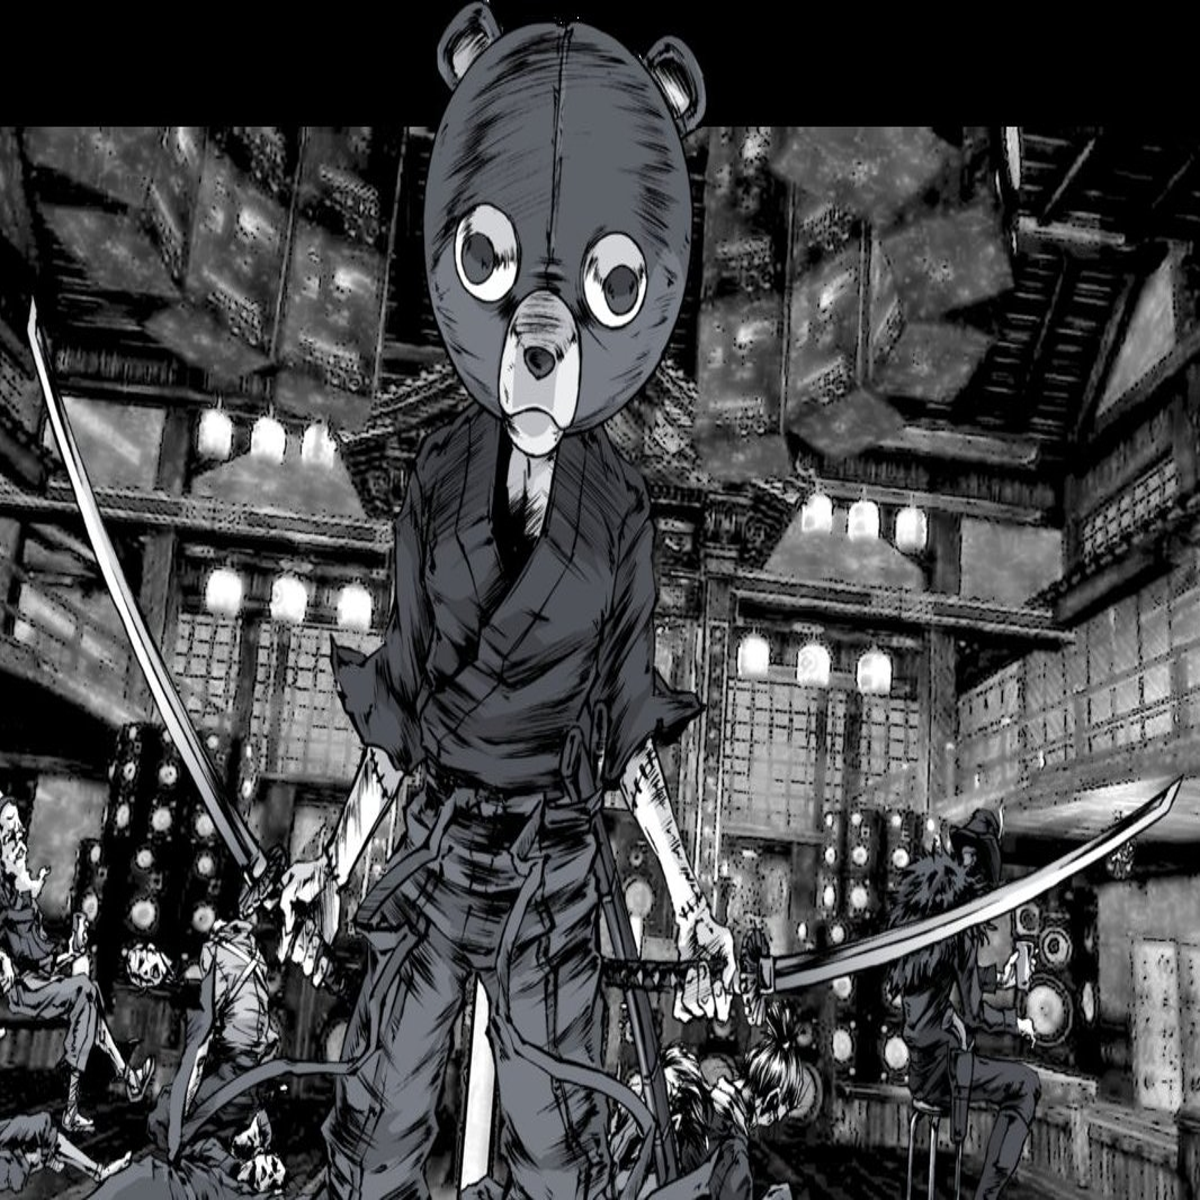 Afro Samurai 2 announced for PC and consoles